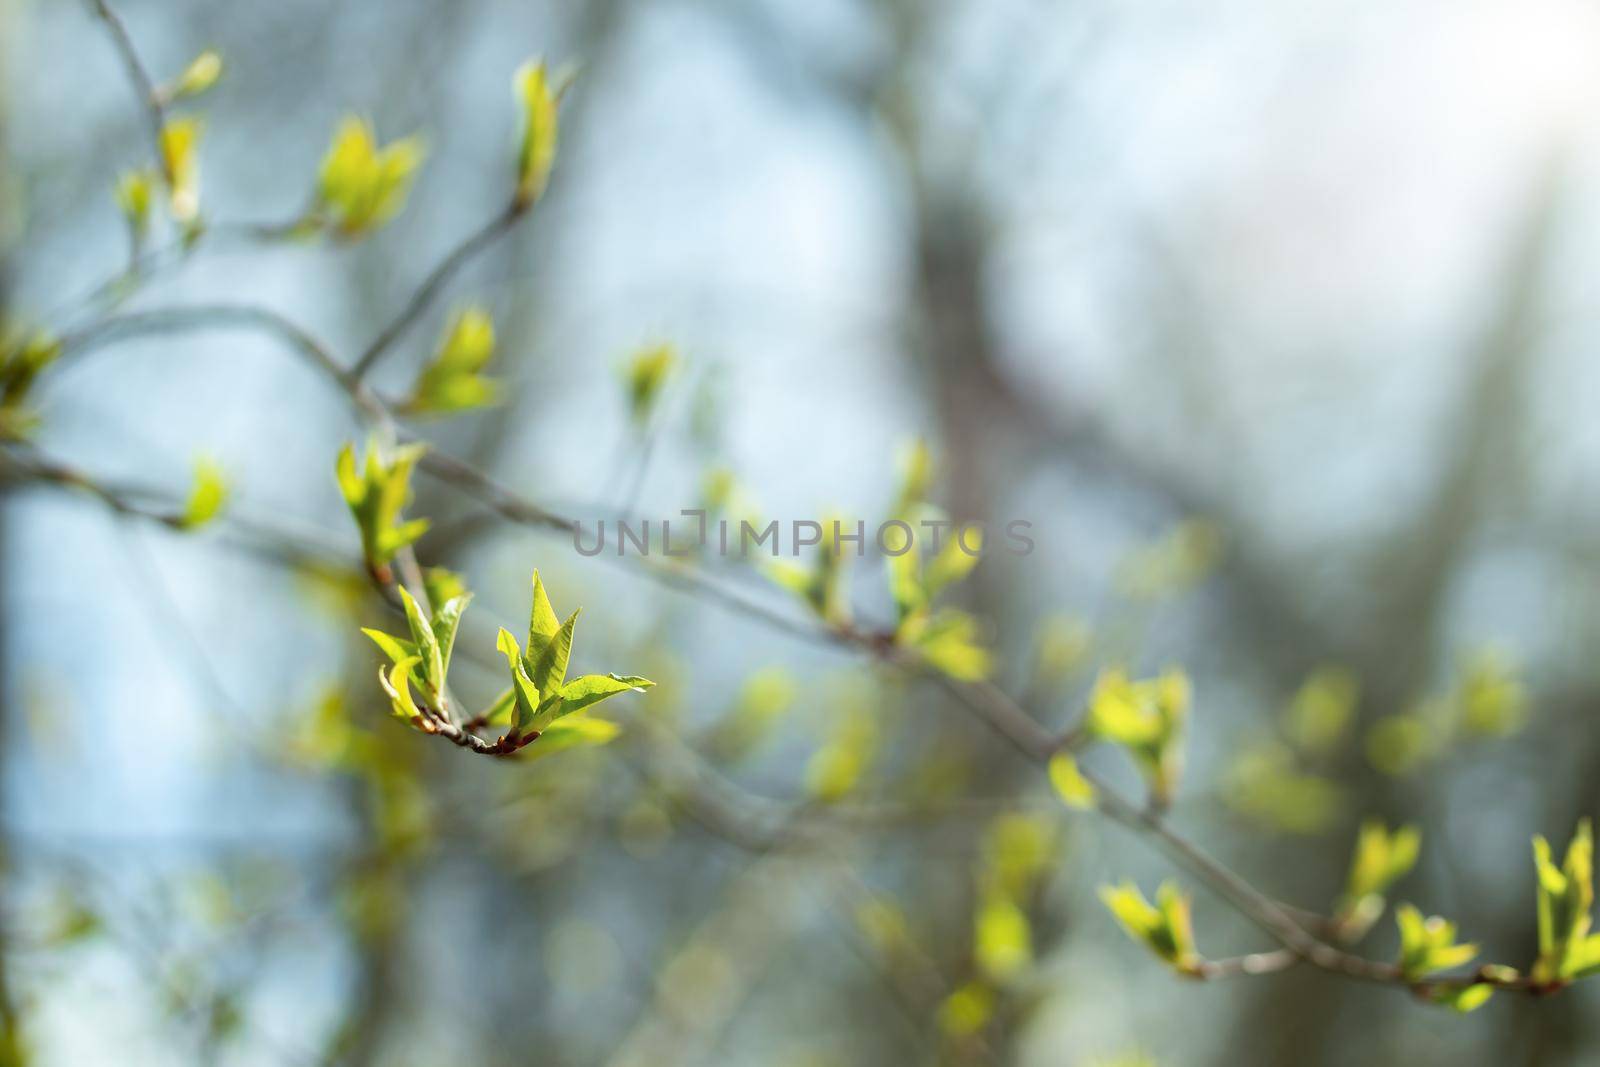 New leaves bloom from their buds on the branches of the tree. Beautiful spring background.